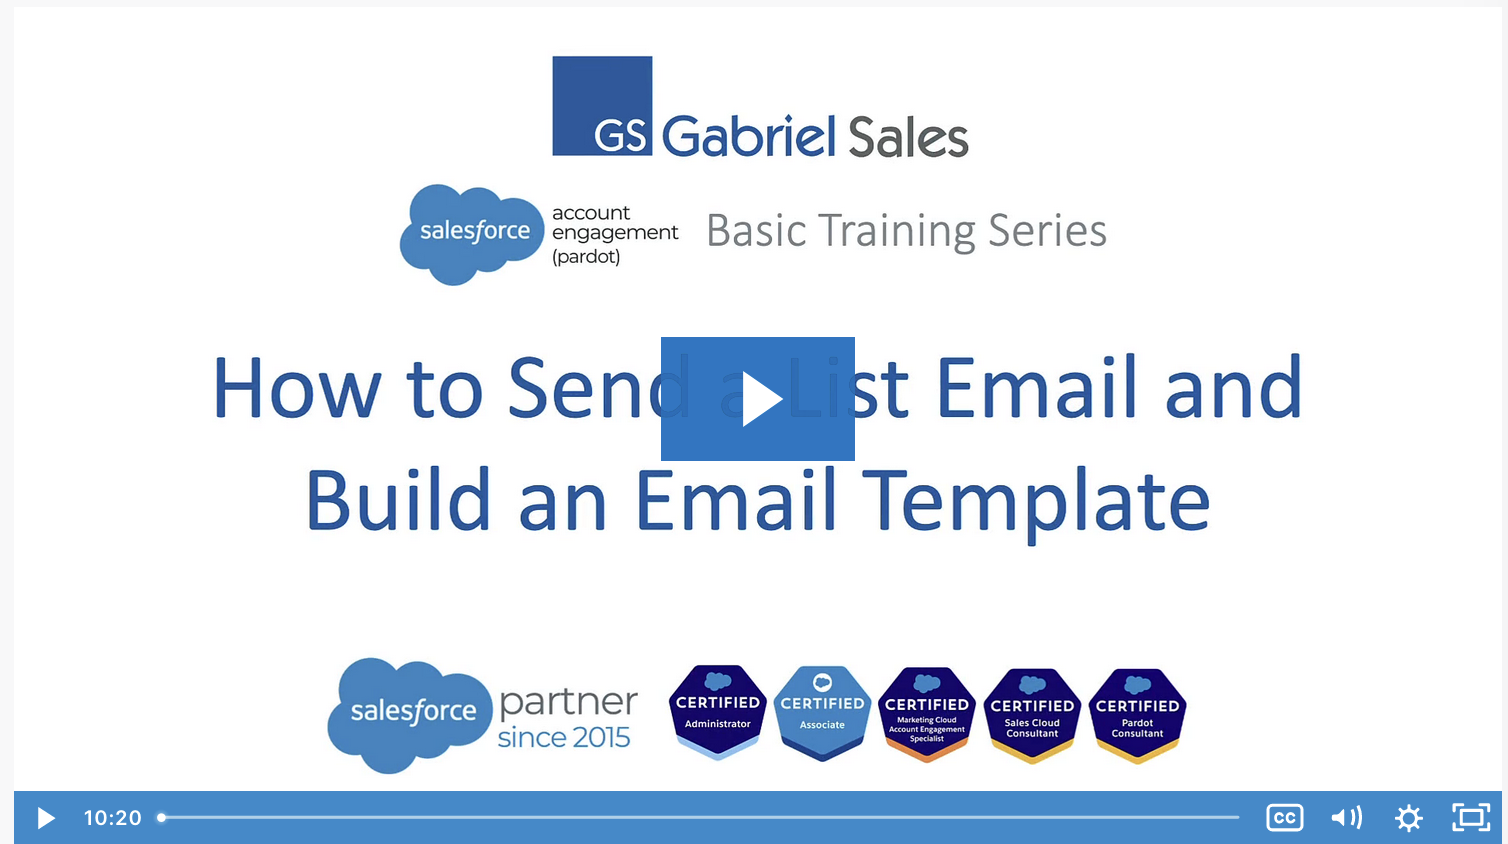 How to Build a Form in Account Engagement (Pardot) – Sales Tech Tutorial